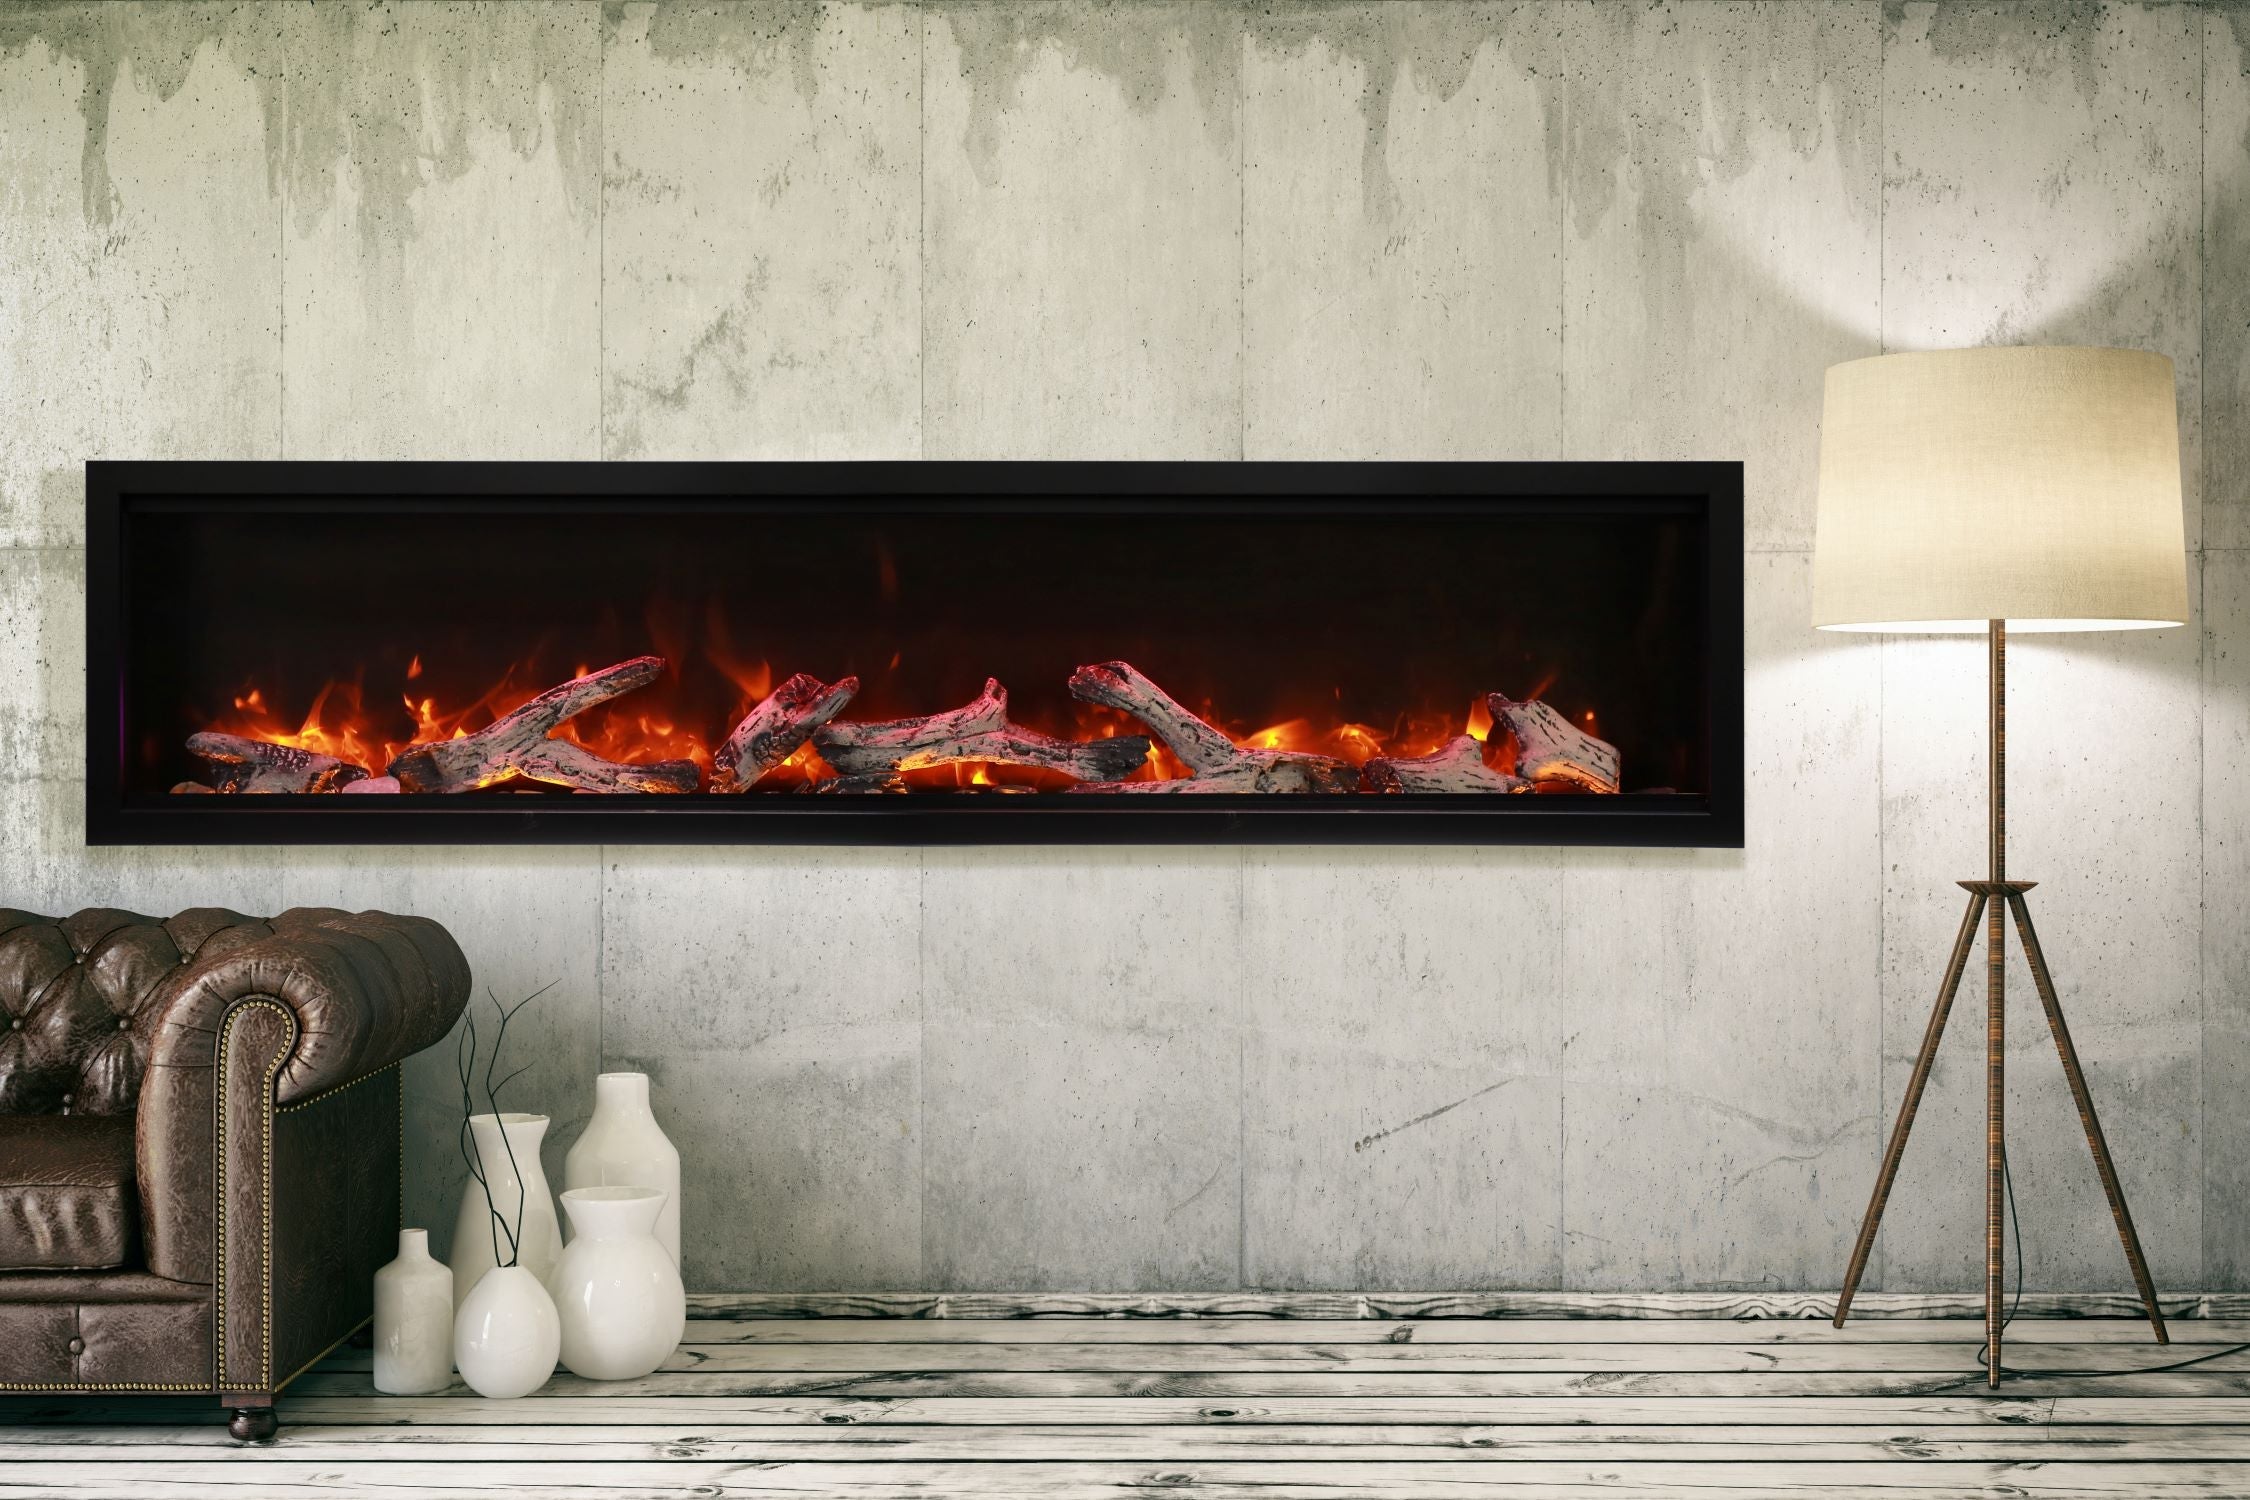 Amantii 88" Symmetry 3.0 Extra Tall Built-in Smart WiFi Electric Fireplace -SYM-88-XT- Lifestyle Living Room